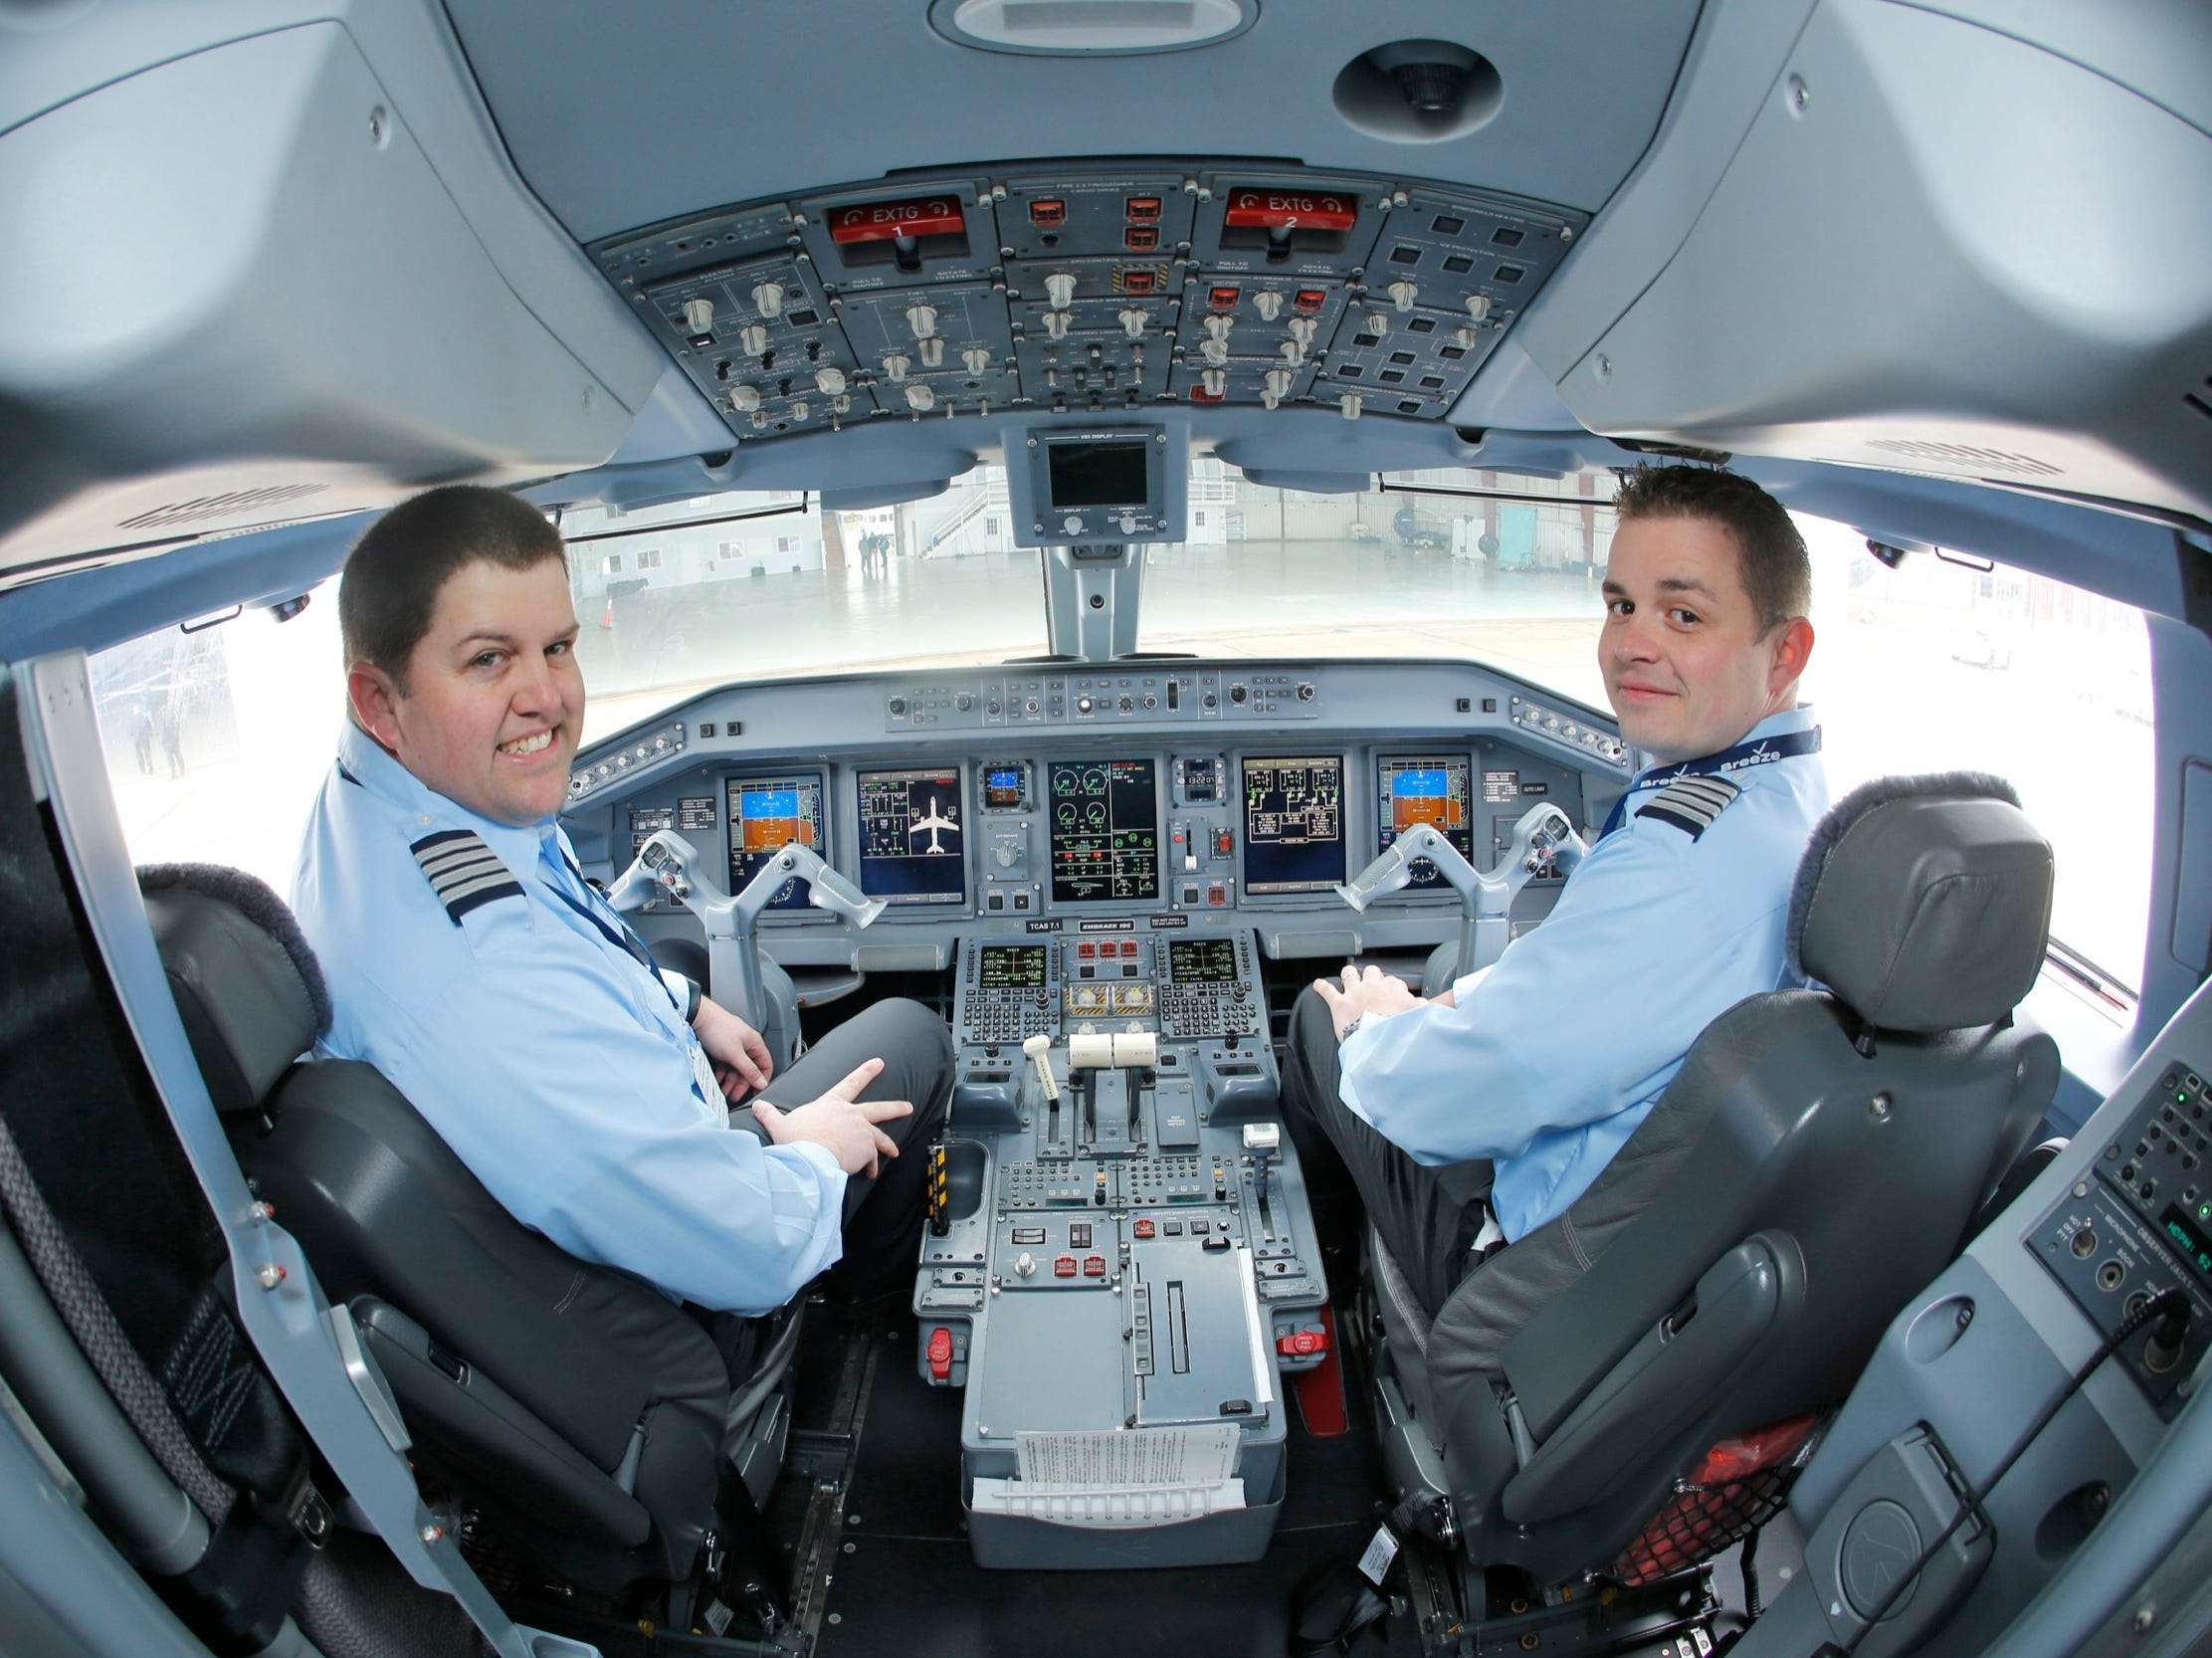 Jetblue founder David Neeleman's new airline is recruiting pilots and